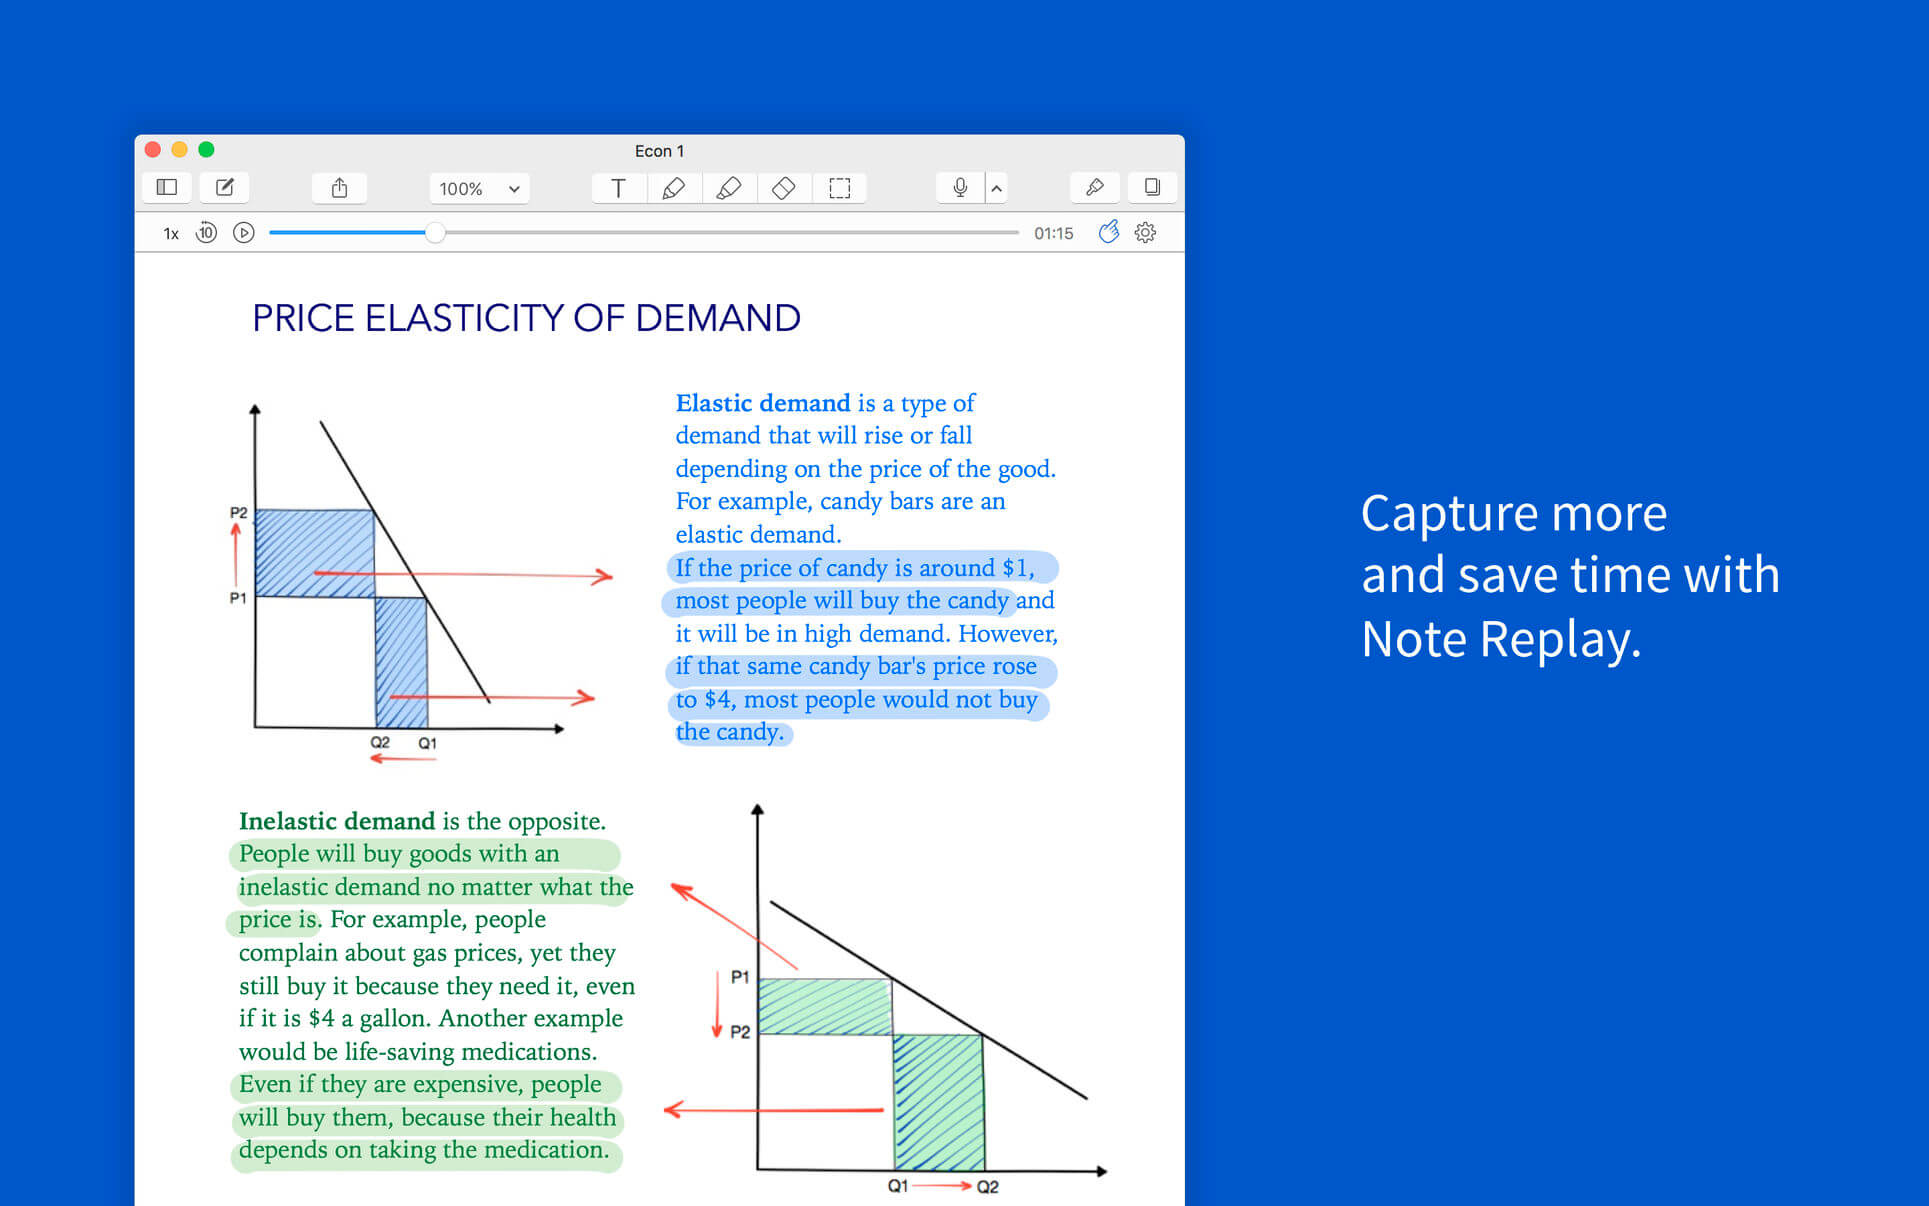 is the notability app good for ipad and mac